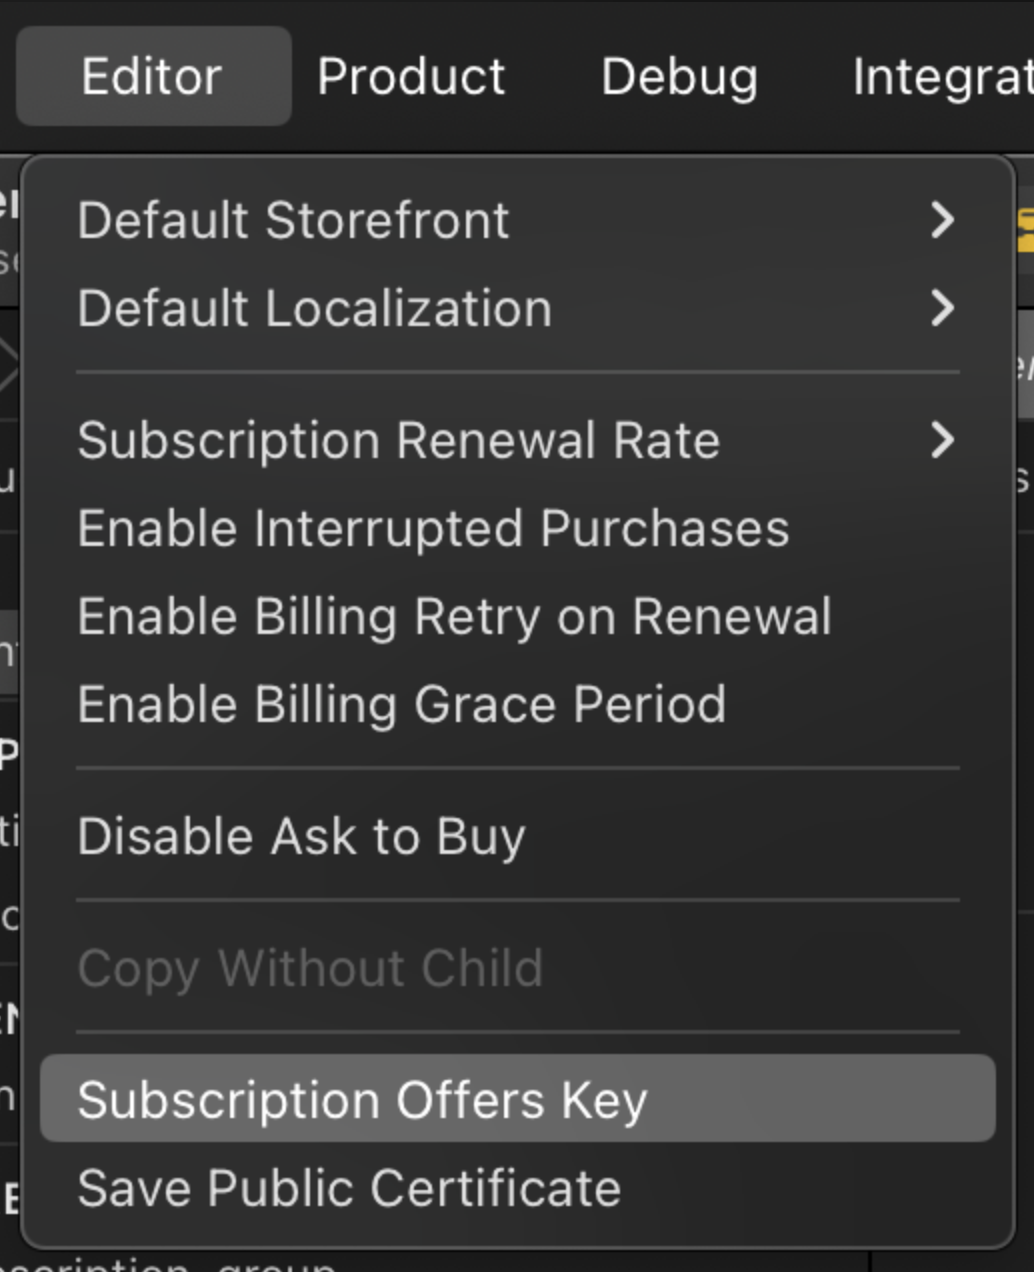 Find Subscription Offers Key